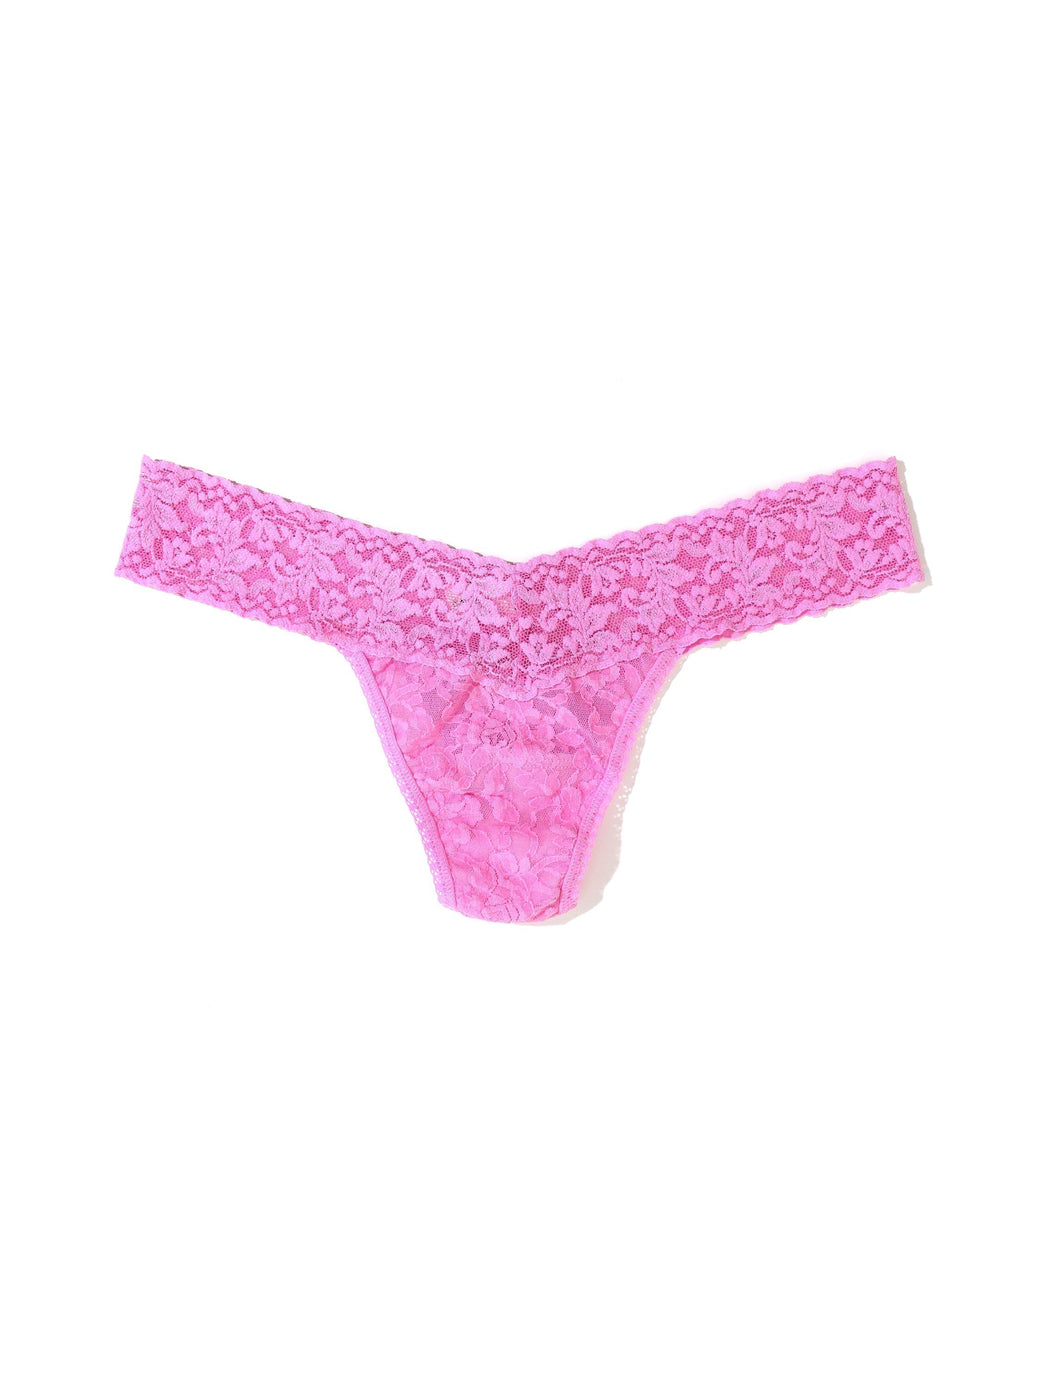 Hanky Panky Low Rise Thong Mulberry 4911P - Free Shipping at Largo Drive